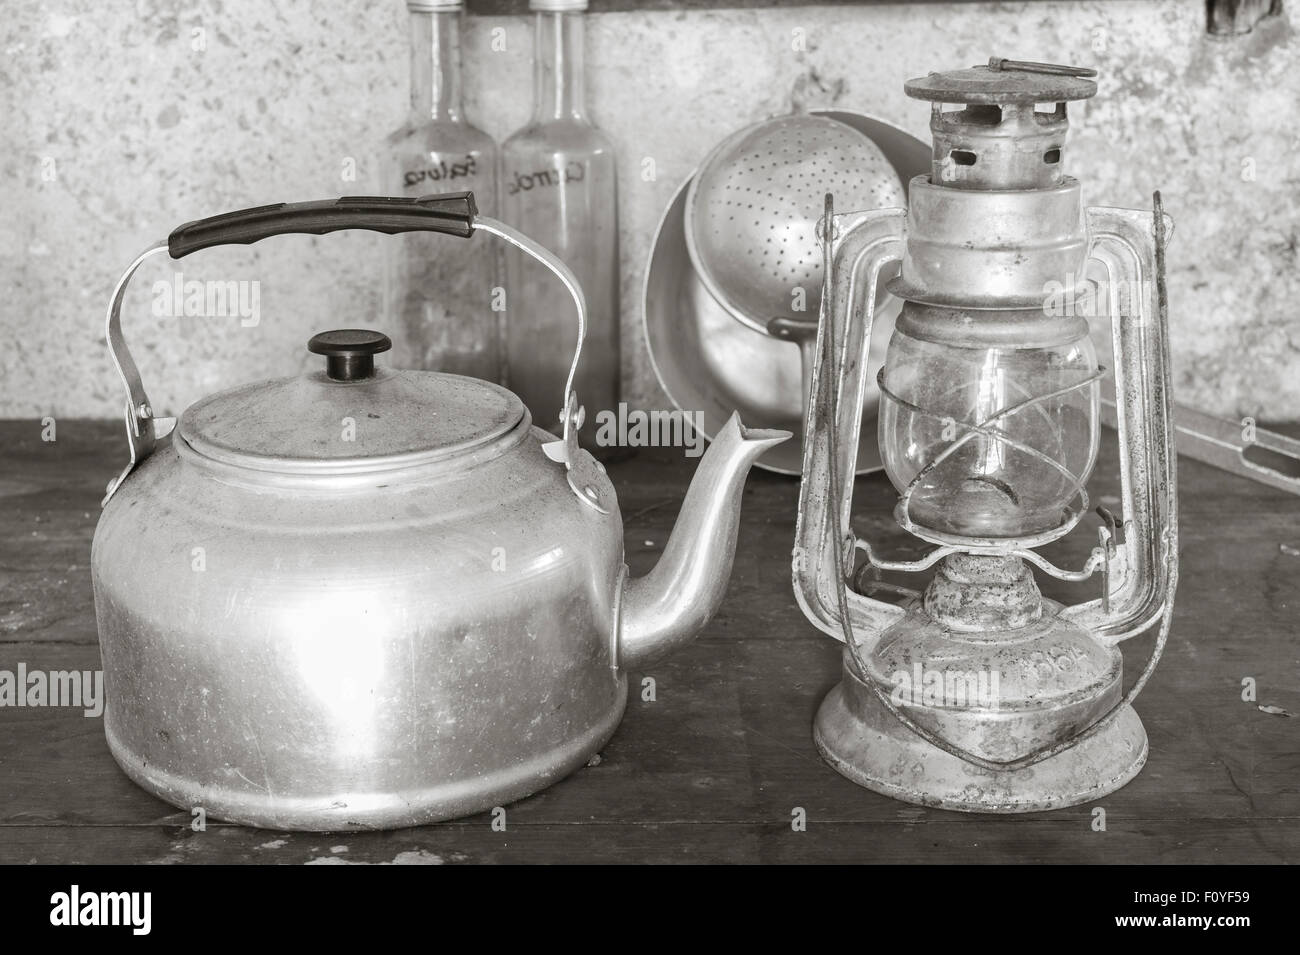 Old objects once: aluminum kettle and old acetylene lamp Stock Photo